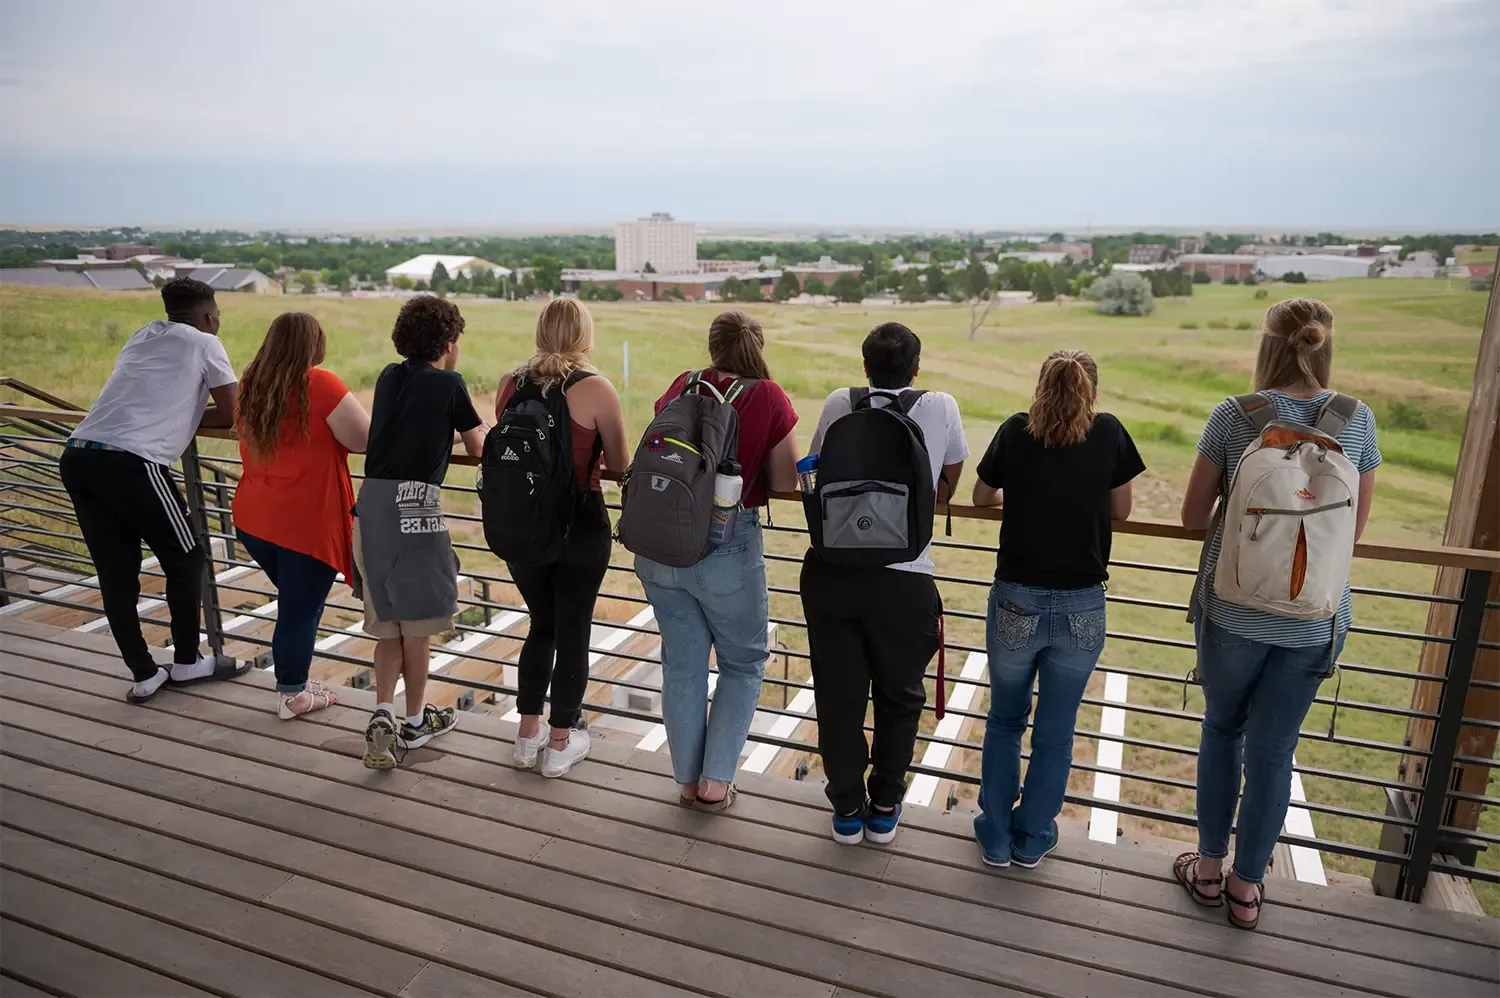 A group of students looking over a railing at the Rangeland Complex